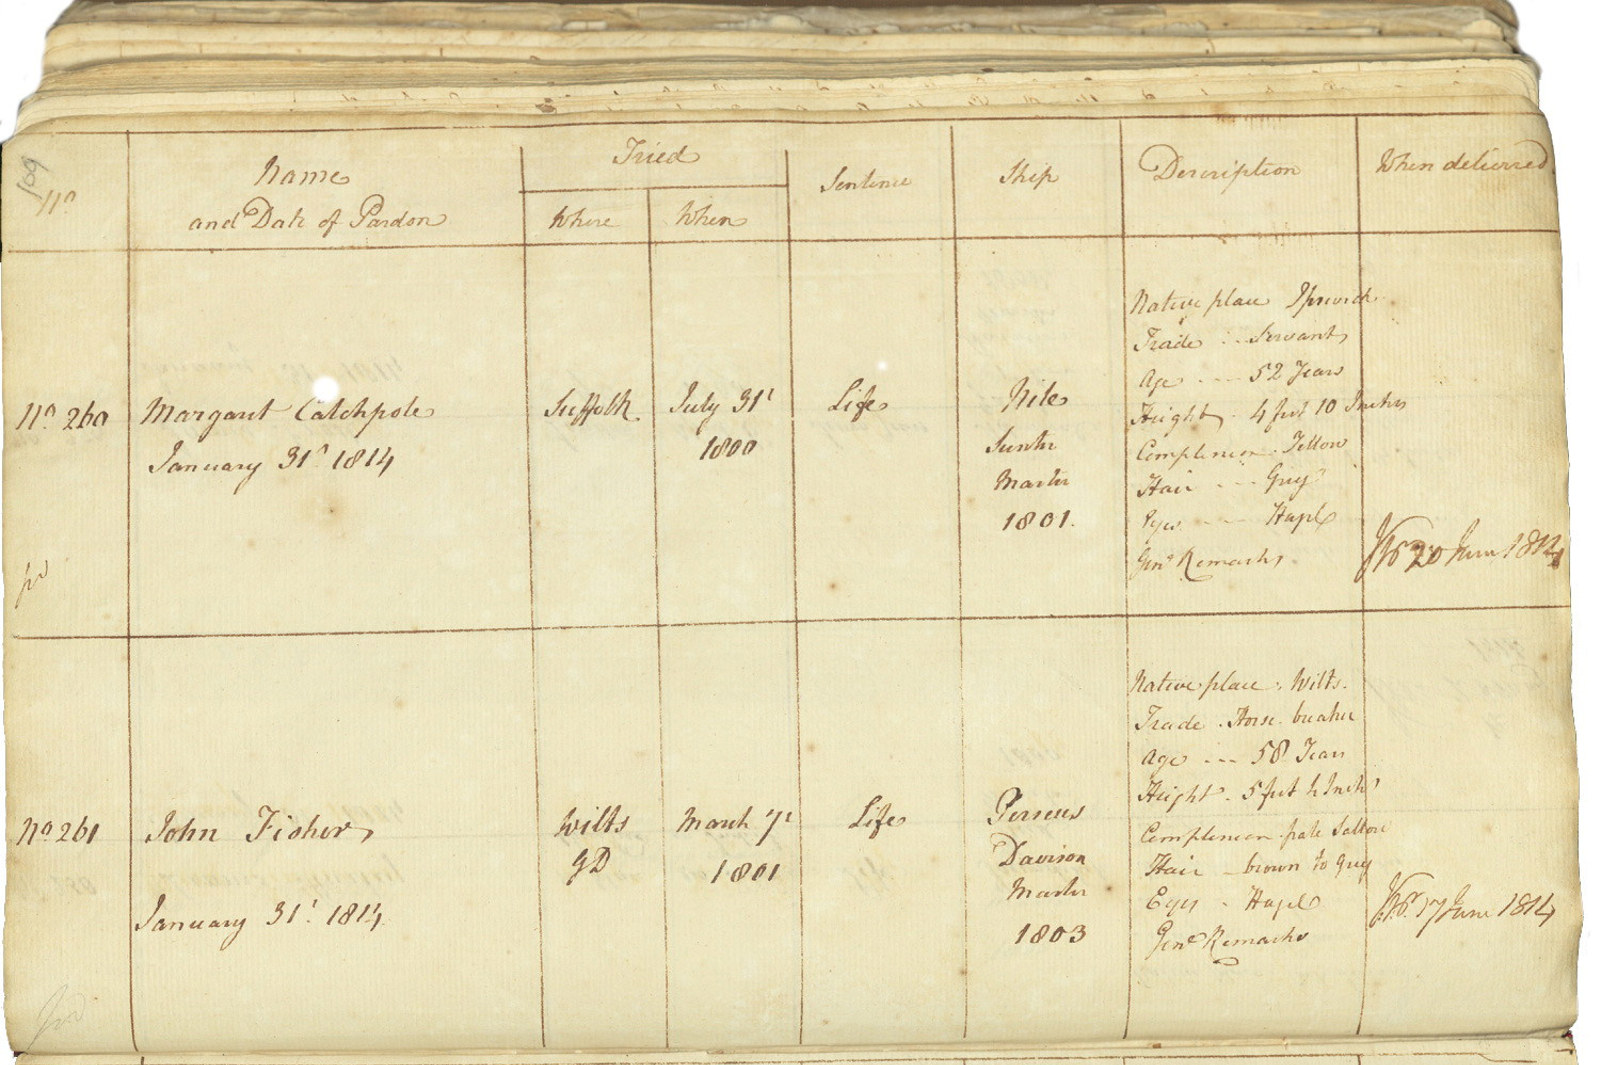 Record of Absolute Pardon granted to Margaret Catchpole 31 January 1814